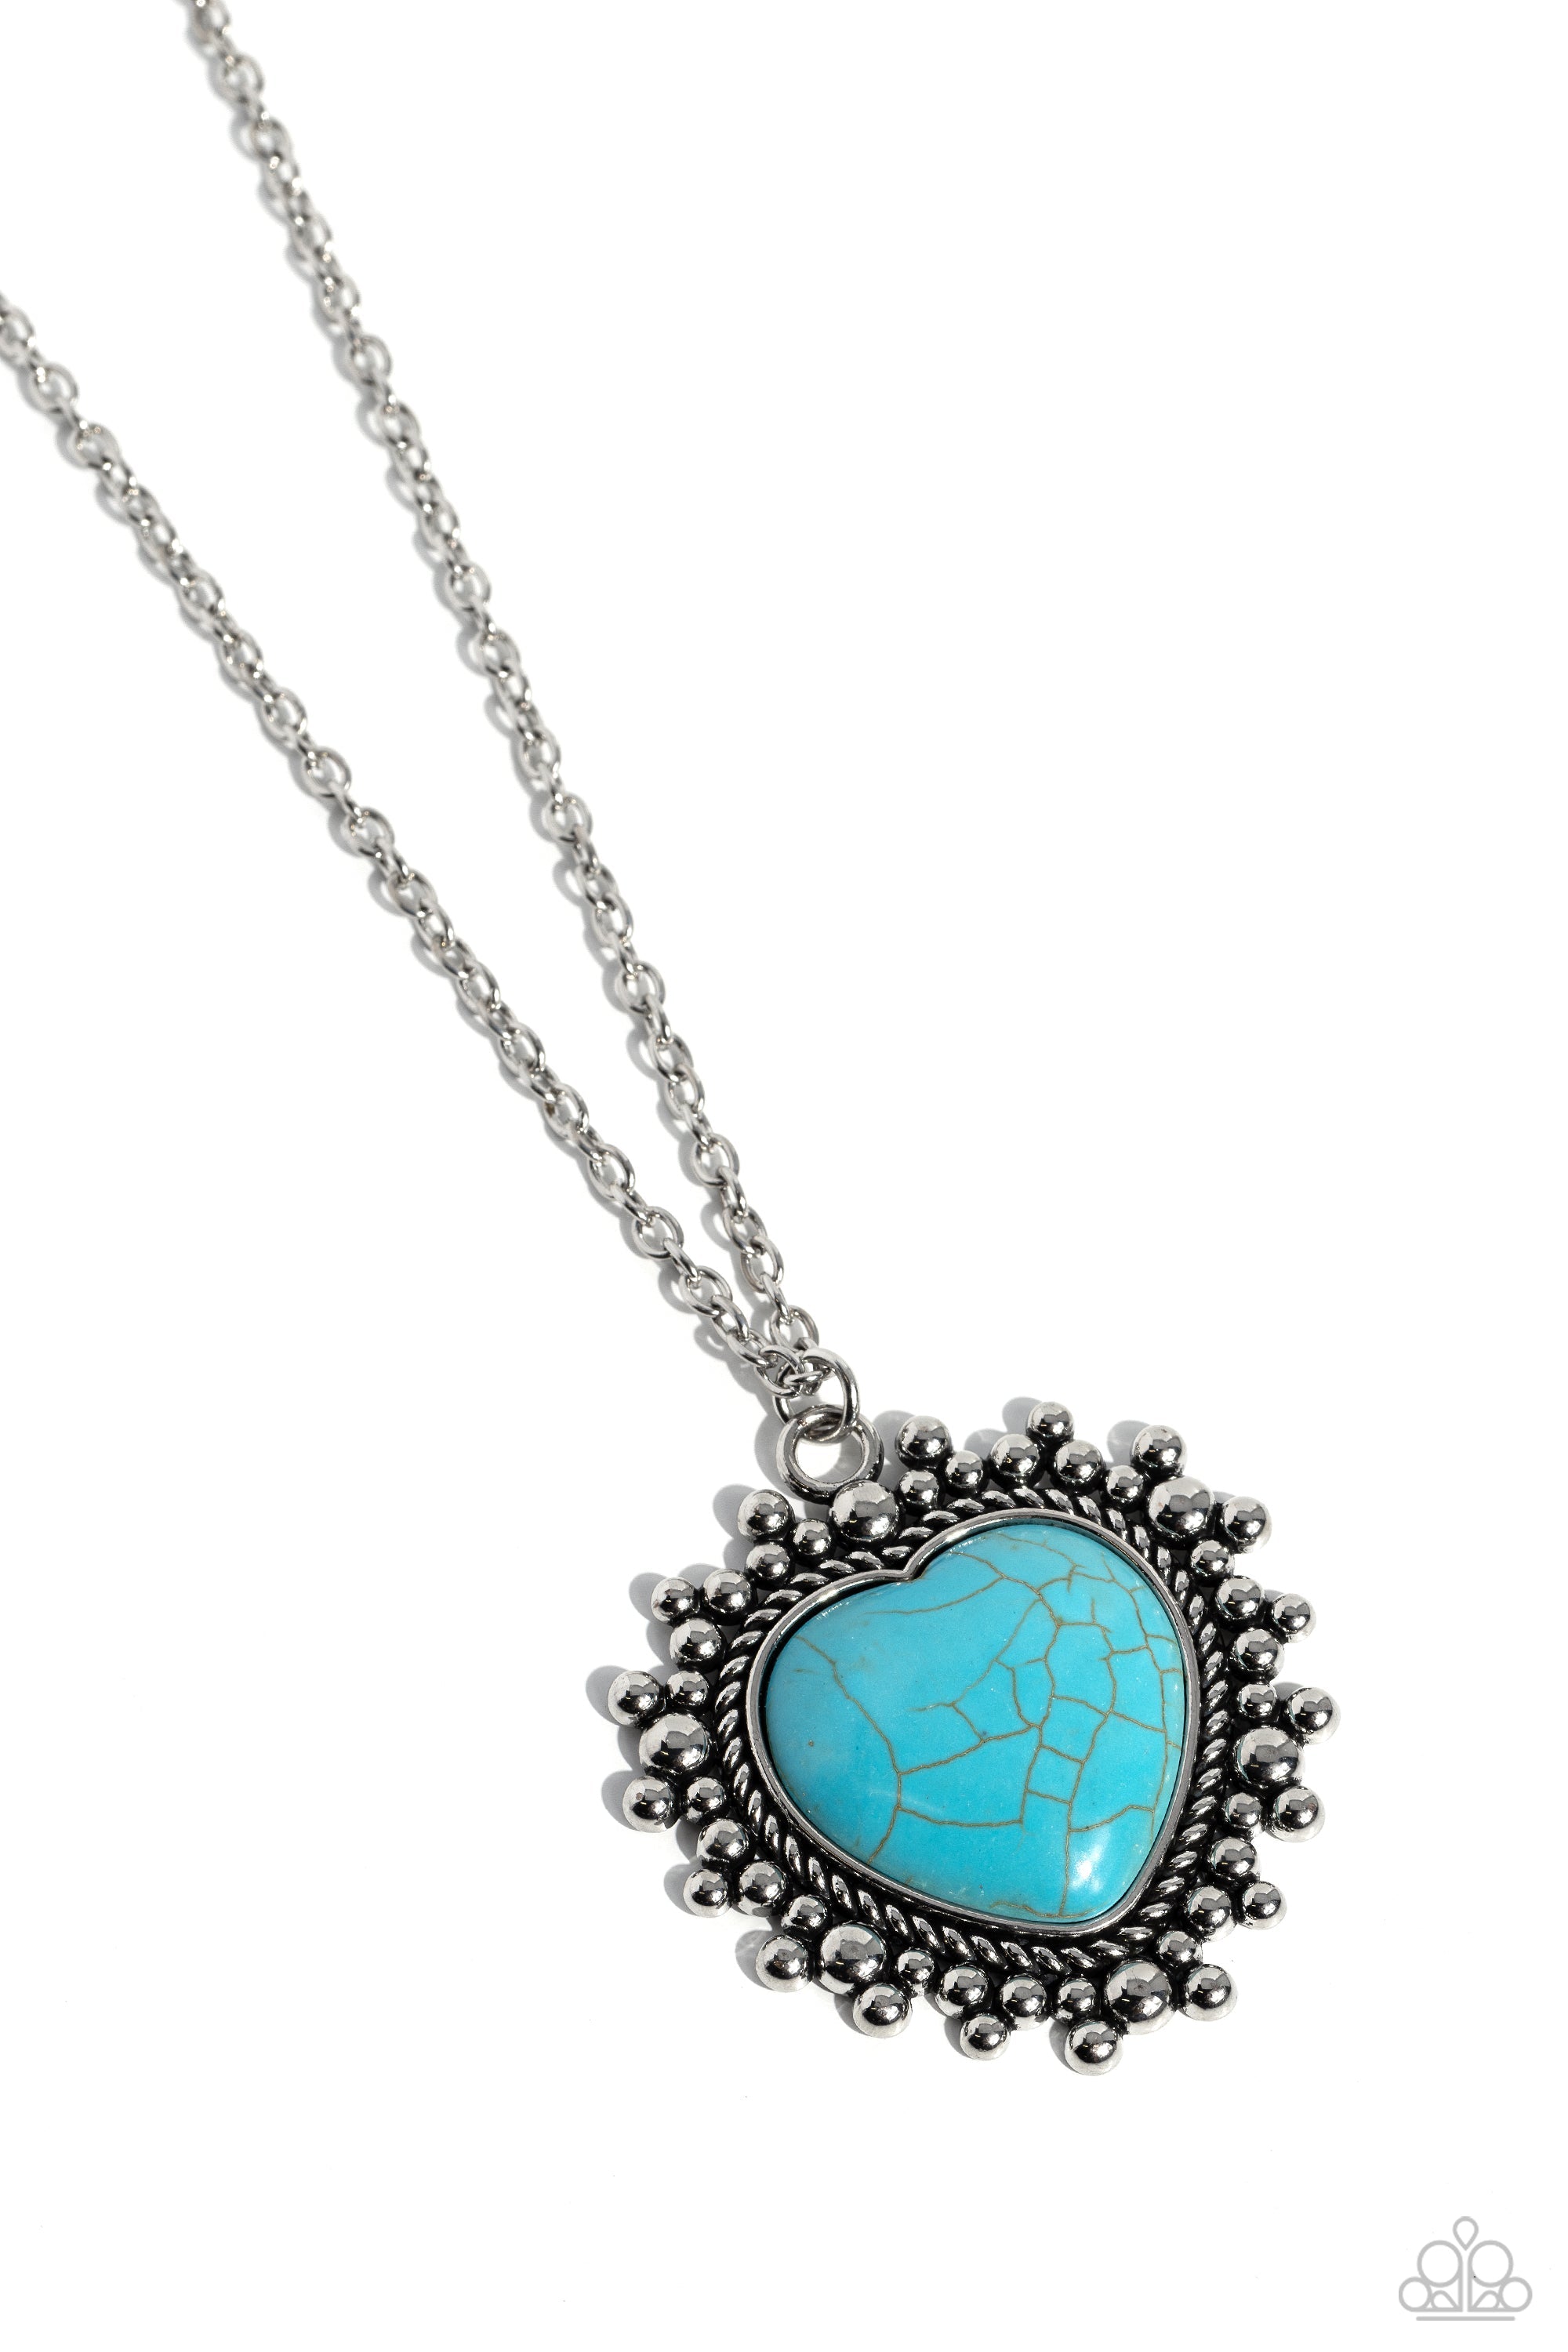 Southwestern Sentiment Turquoise Blue Stone Heart Necklace - Paparazzi Accessories- lightbox - CarasShop.com - $5 Jewelry by Cara Jewels